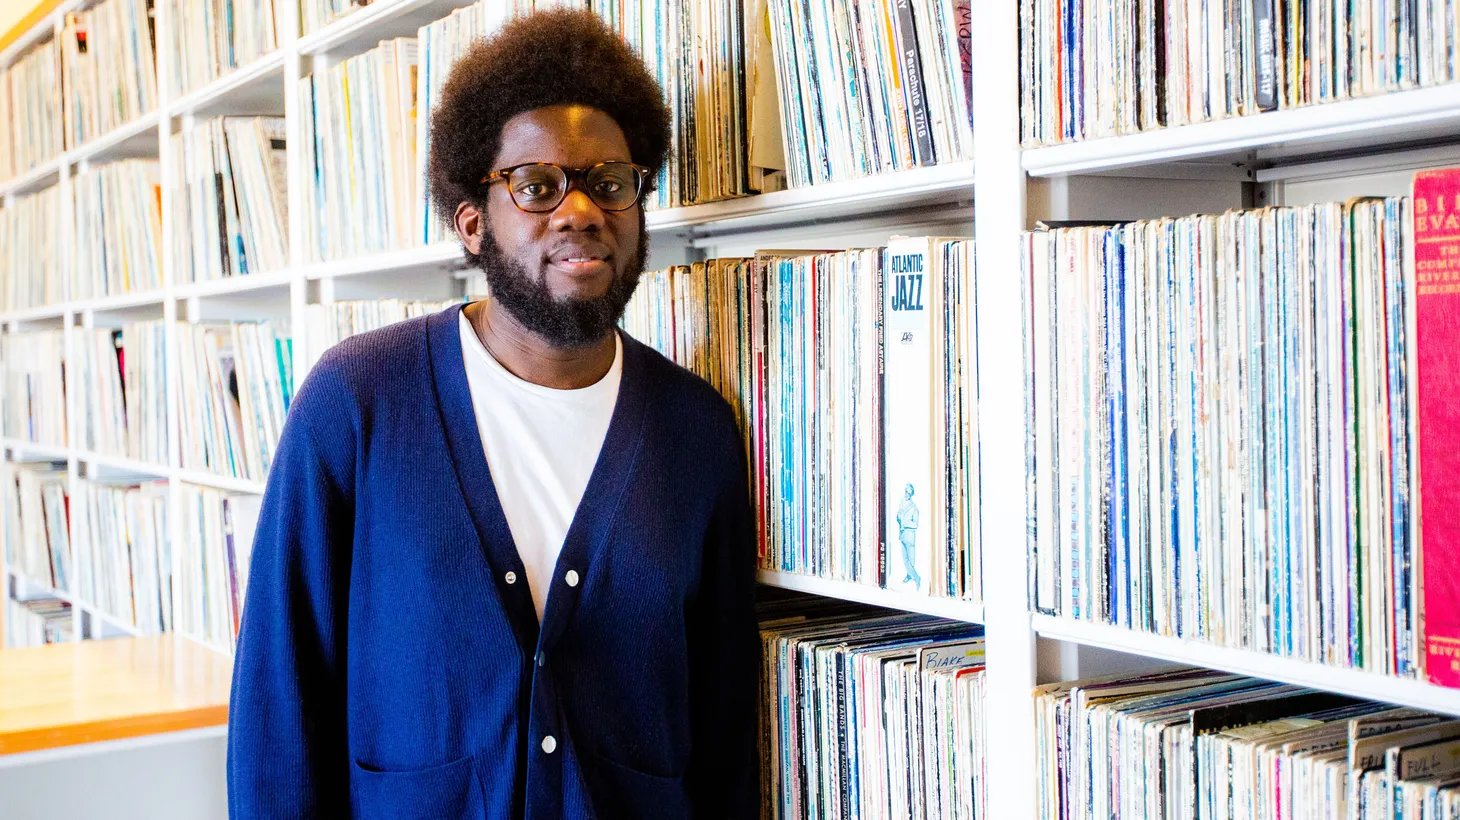 Michael Kiwanuka's third album is one of self-discovery and self- acceptance. He recently visited KCRW for a stripped down performance of new tracks from his latest album Kiwanuka.